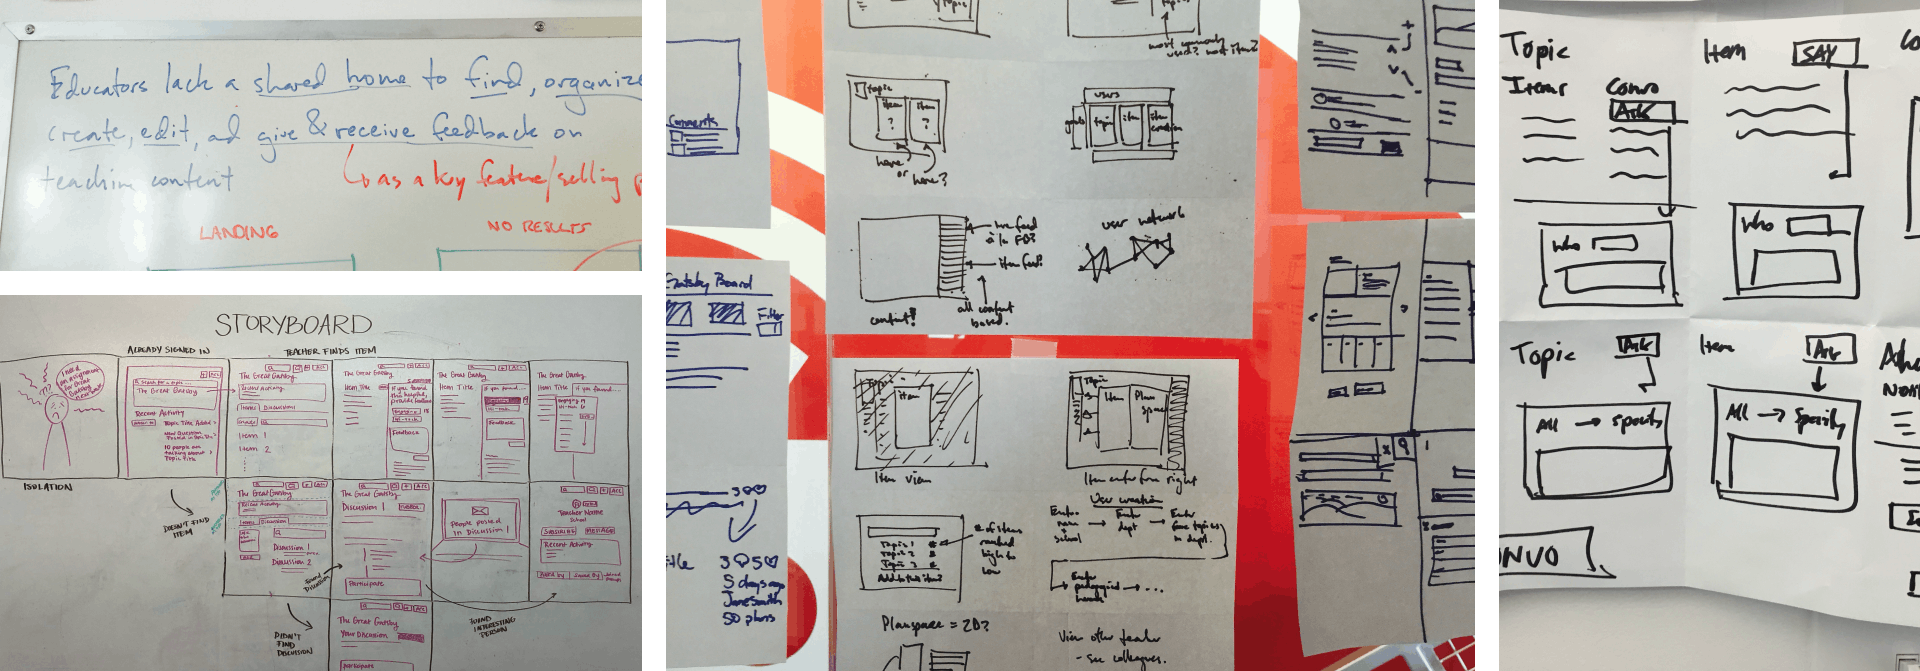 Four photos from the Athena design sprints; A problem statement on a whiteboard, a storyboard of a series of screens on a whiteboard, two photos of crazy eights being hung up.